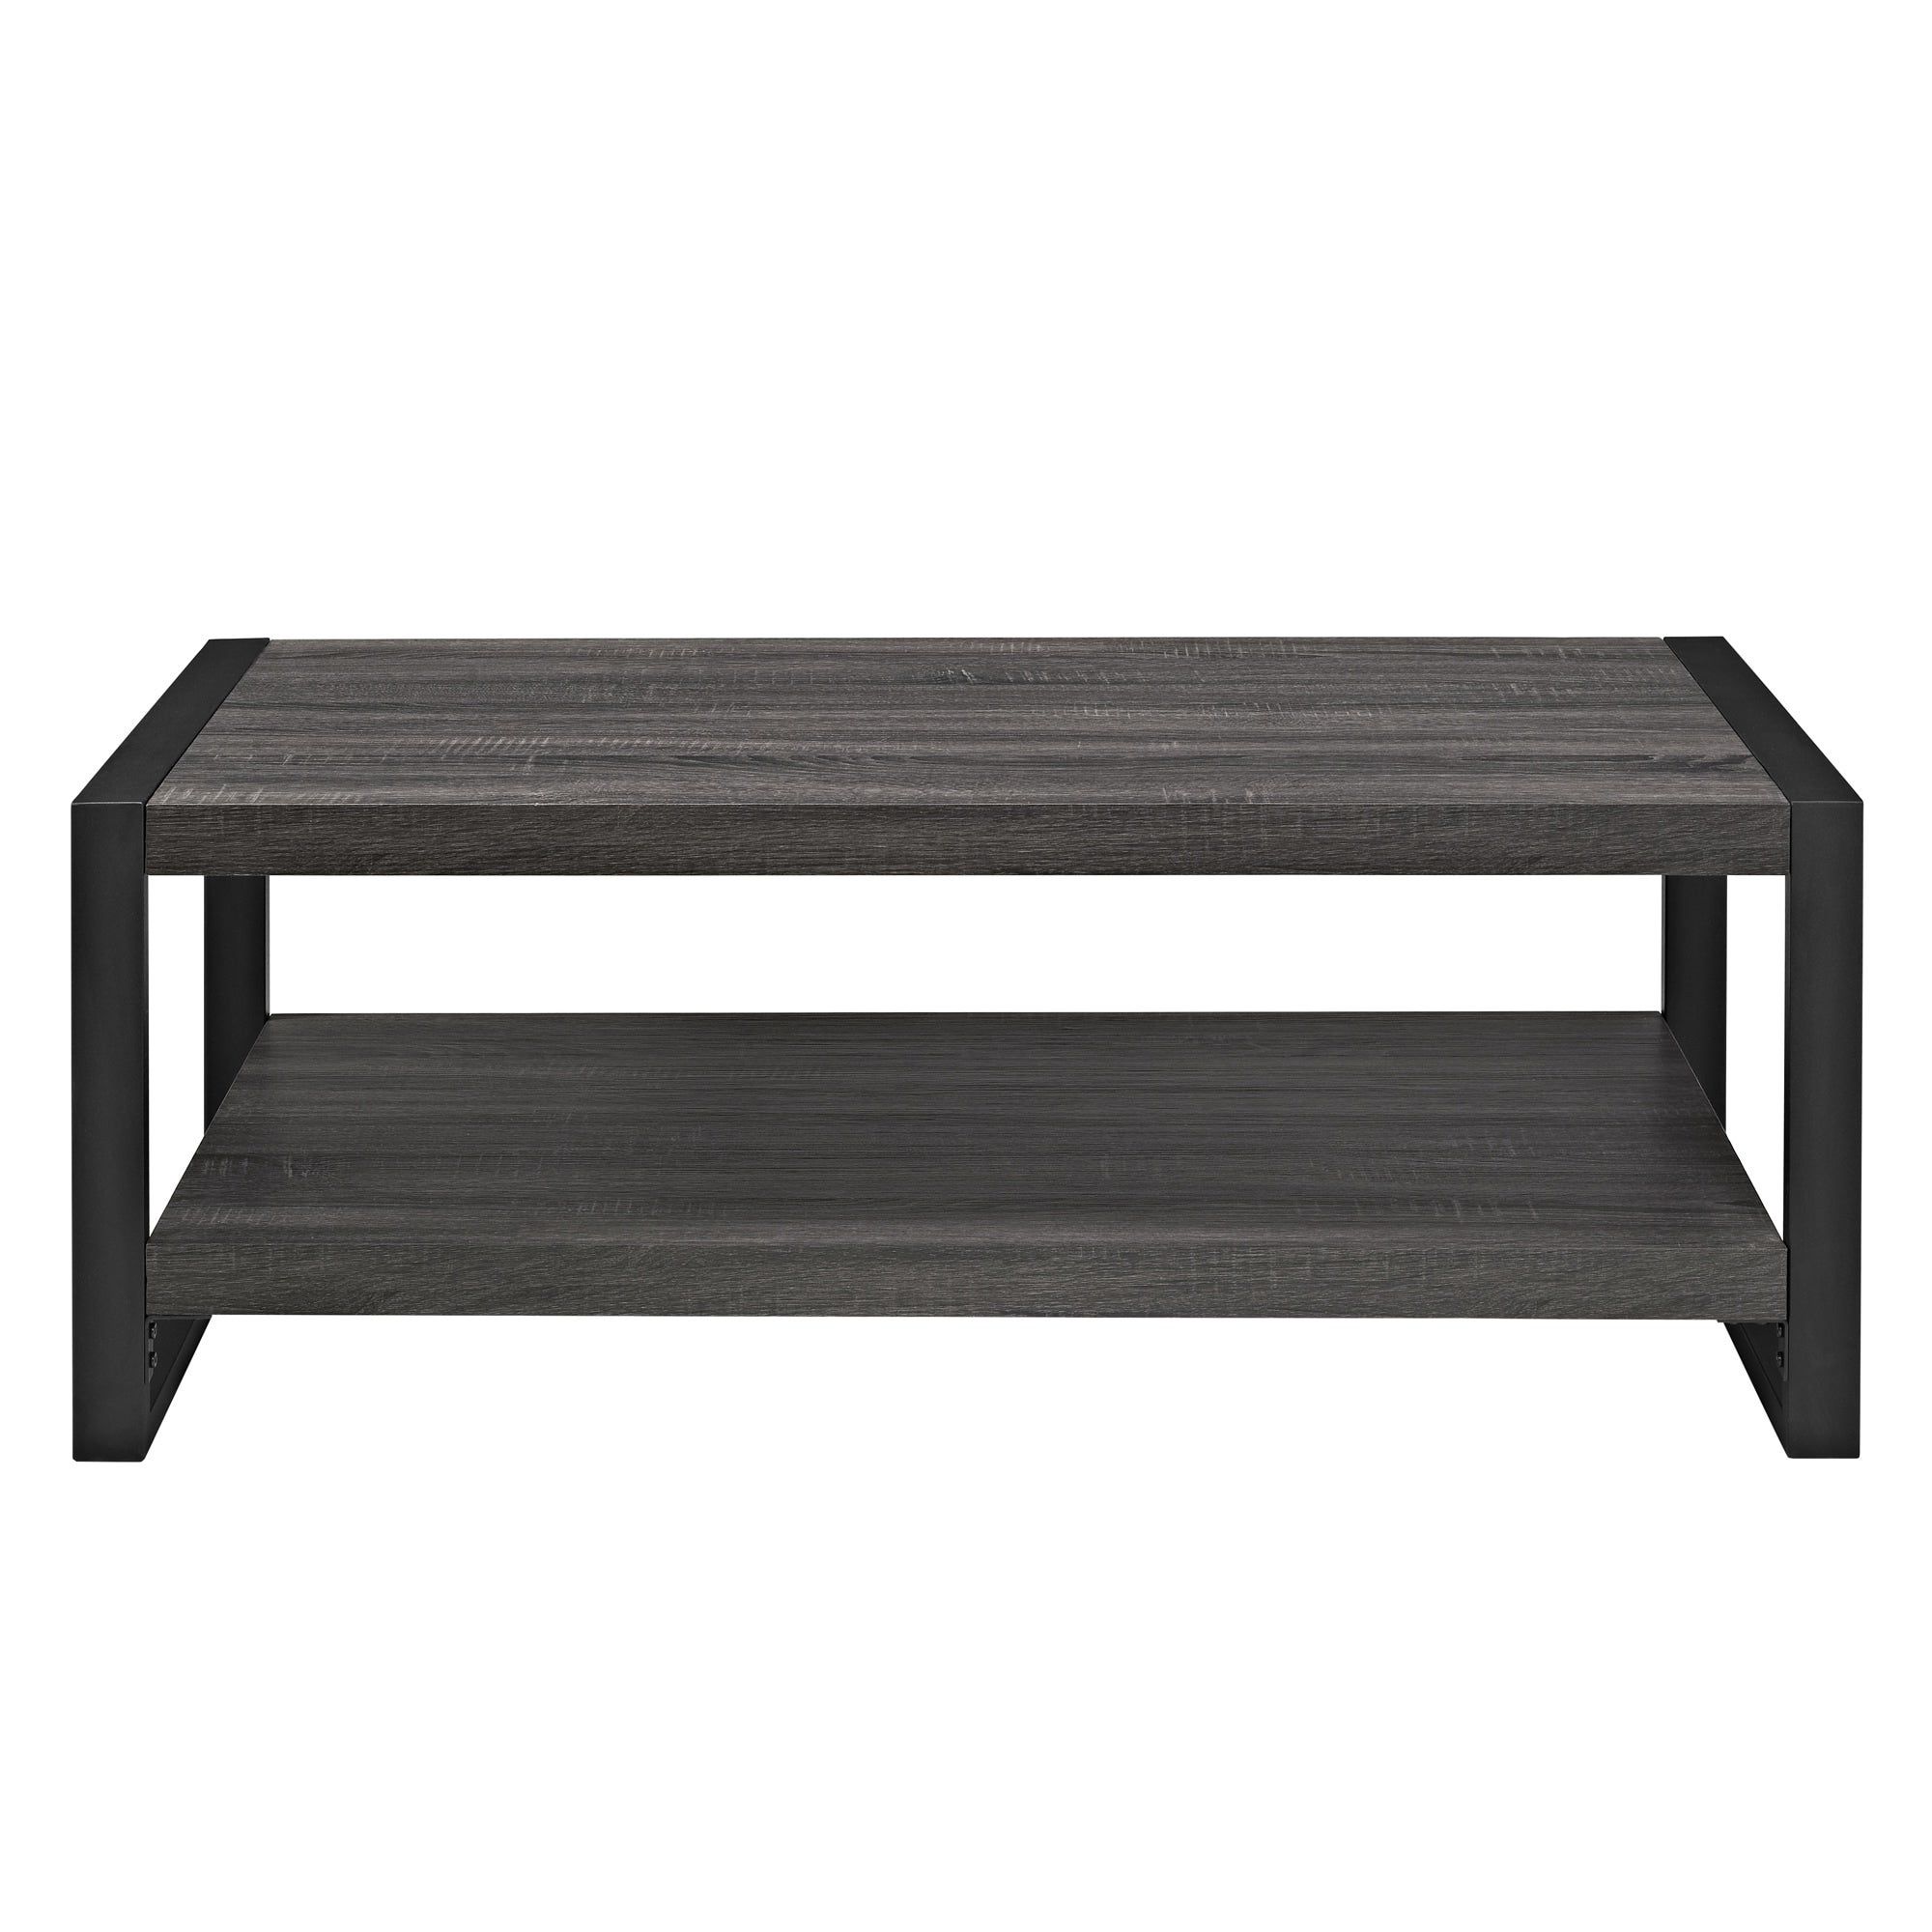 Carbon Loft Hamilton 48 Inch Coffee Table – 48 X 24 X 18h Inside Well Known Carbon Loft Hamilton 48 Inch Coffee Tables (View 4 of 20)